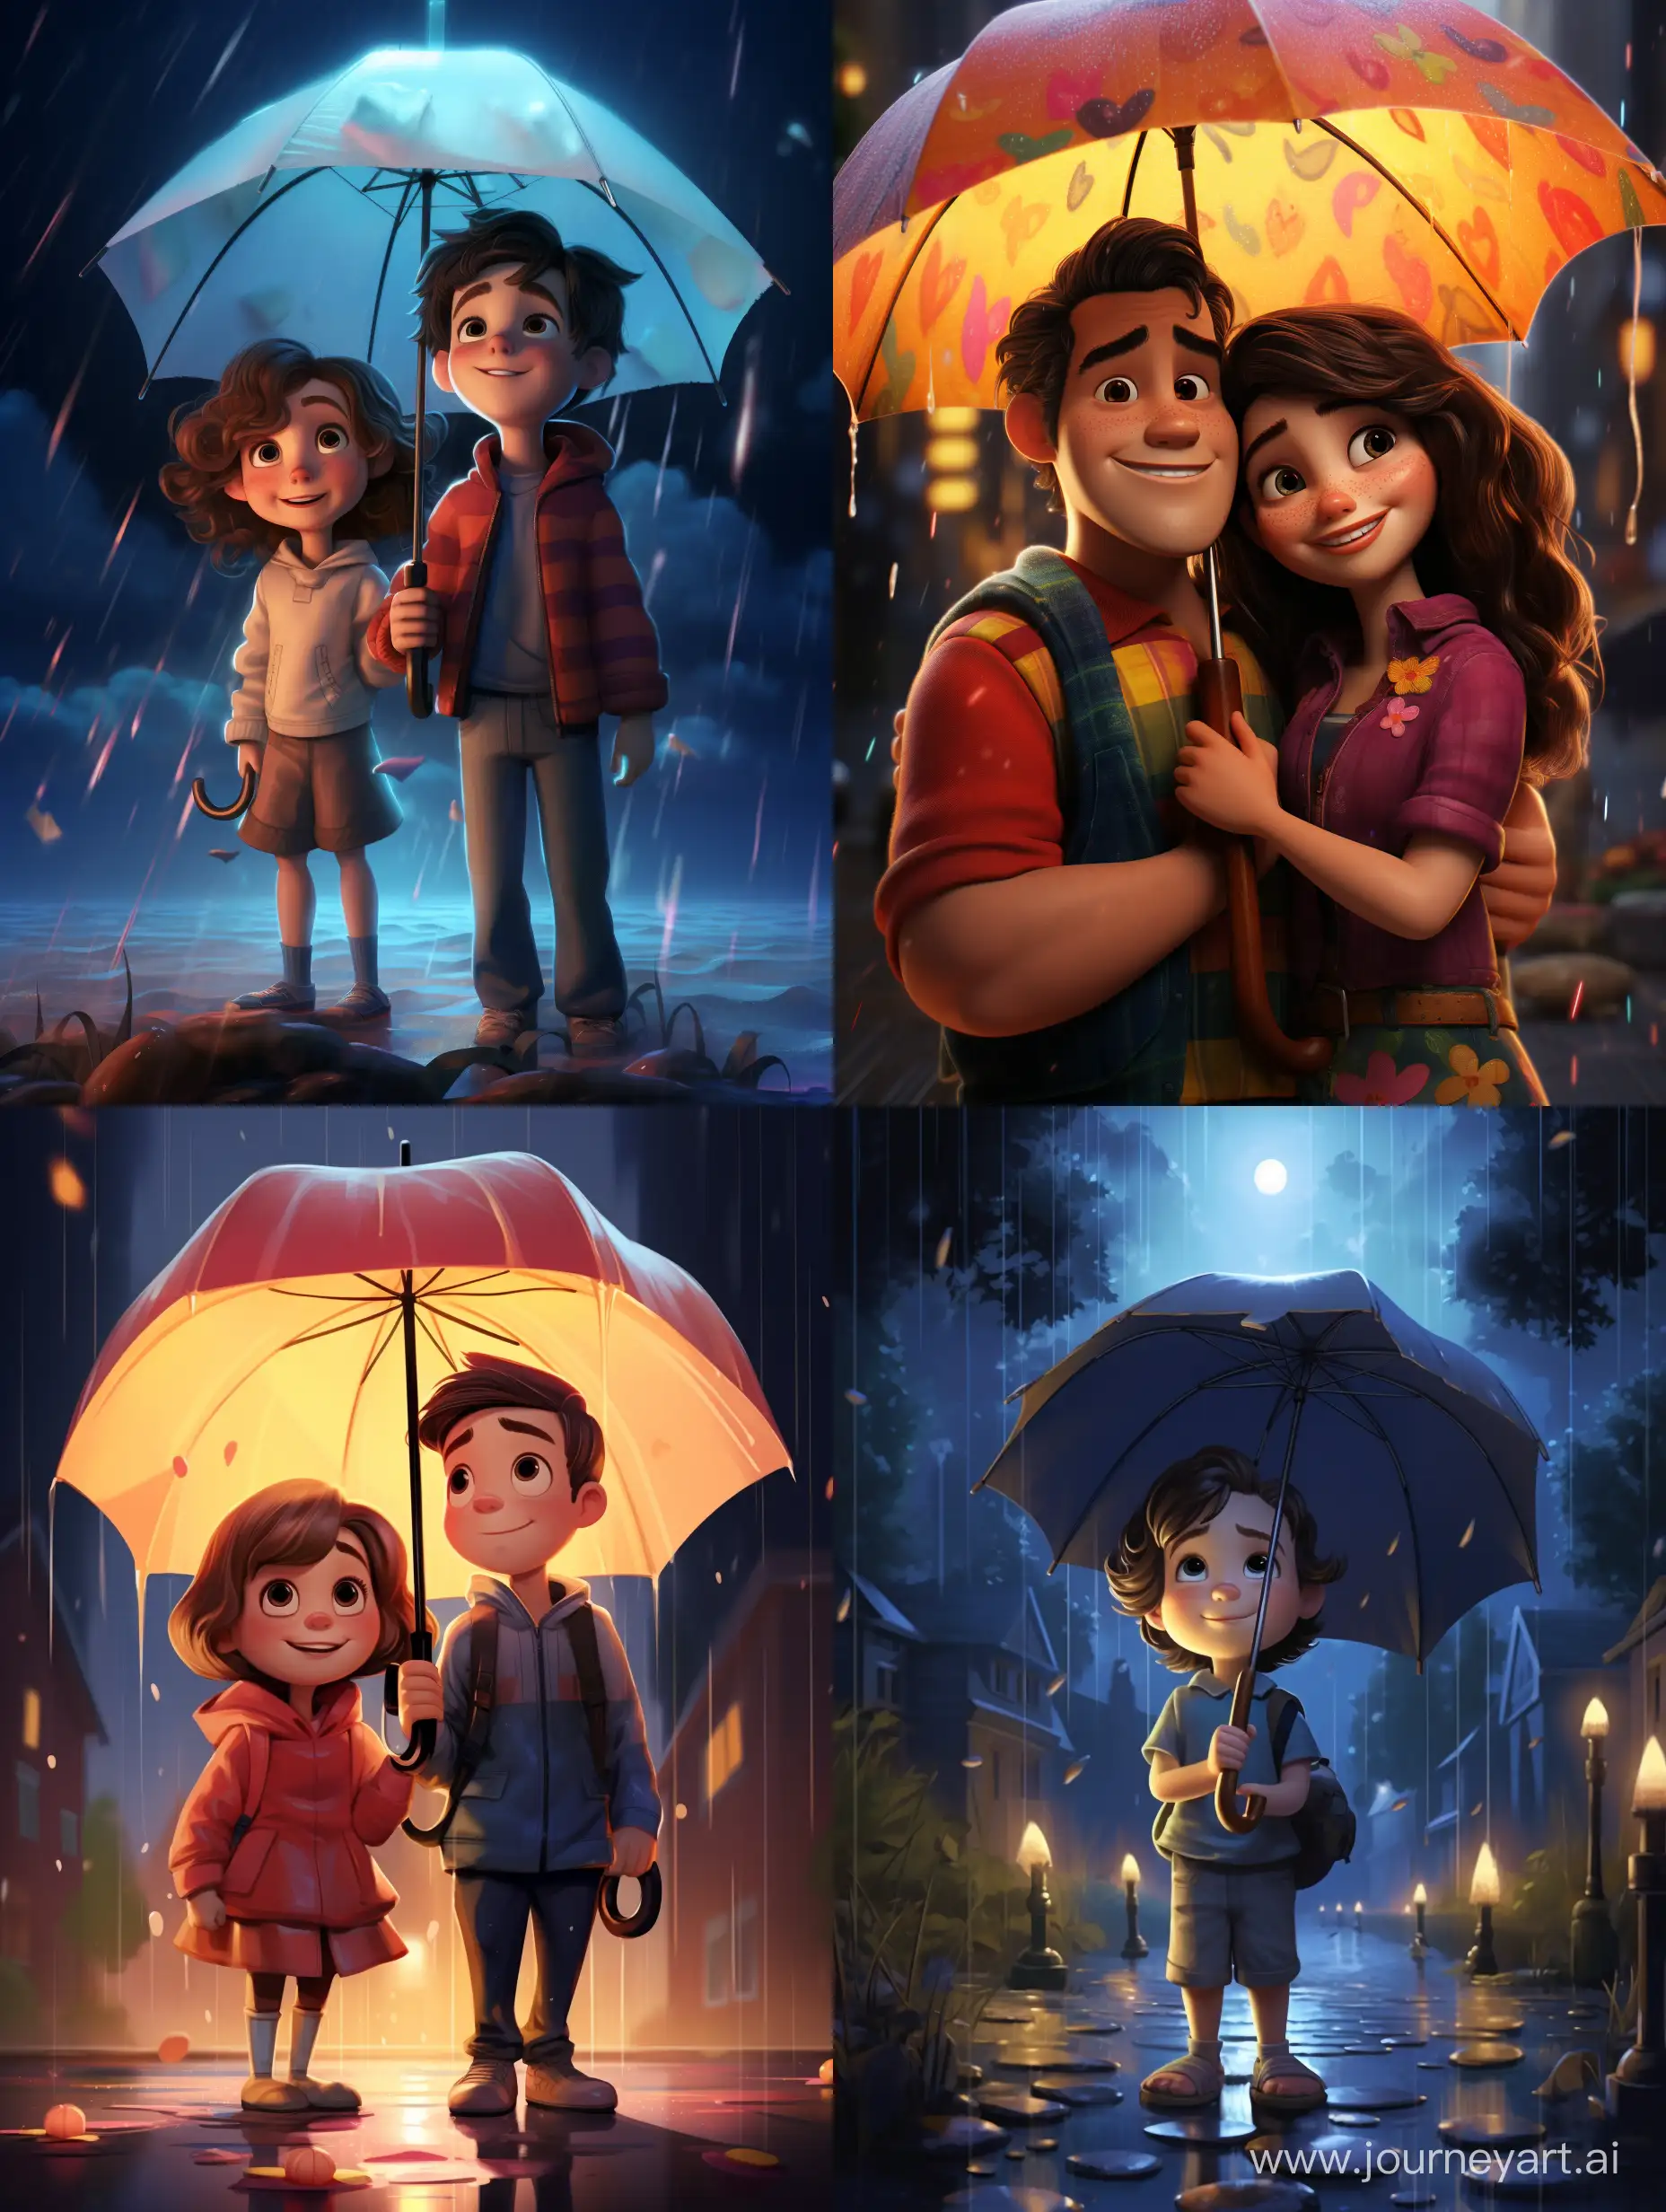 Did you bring an umbrella with you? Pixar Style